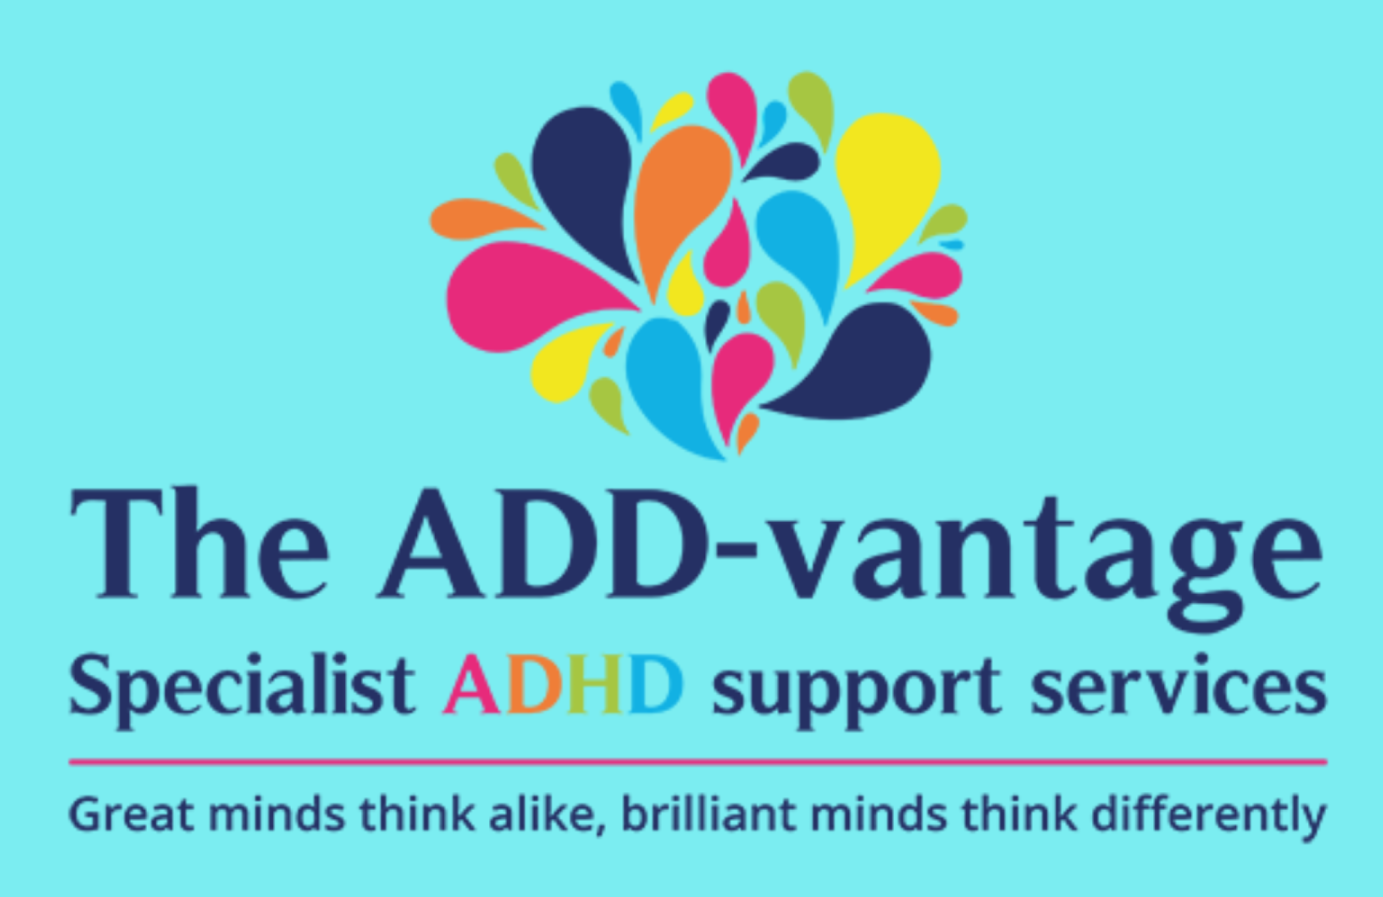 The ADD-vantage Specialist ADHD support services